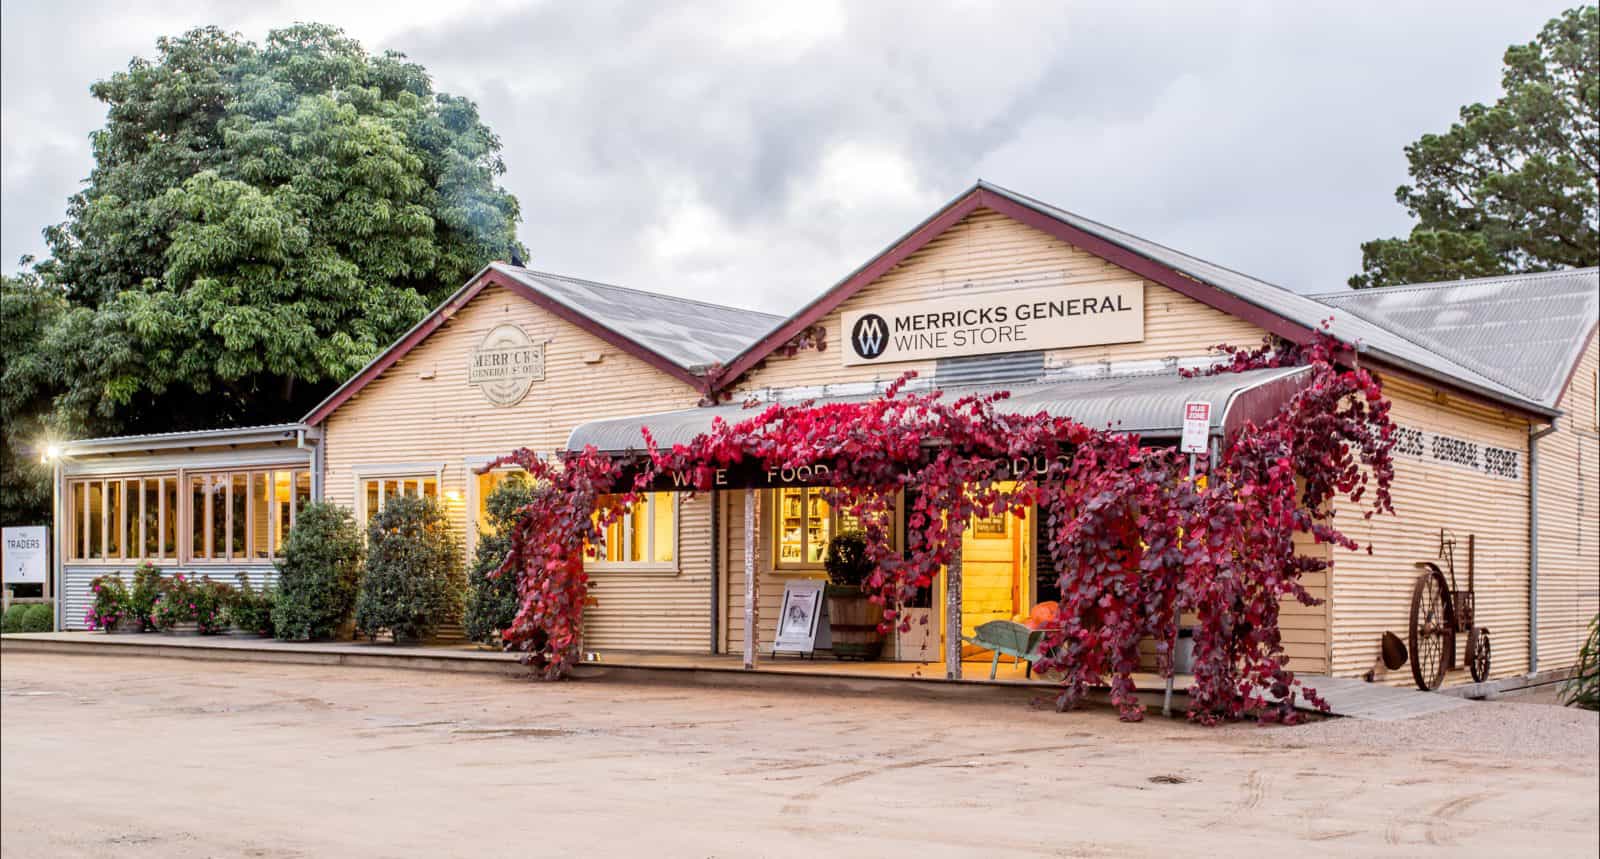 The front entrance at Merricks General Wine Store